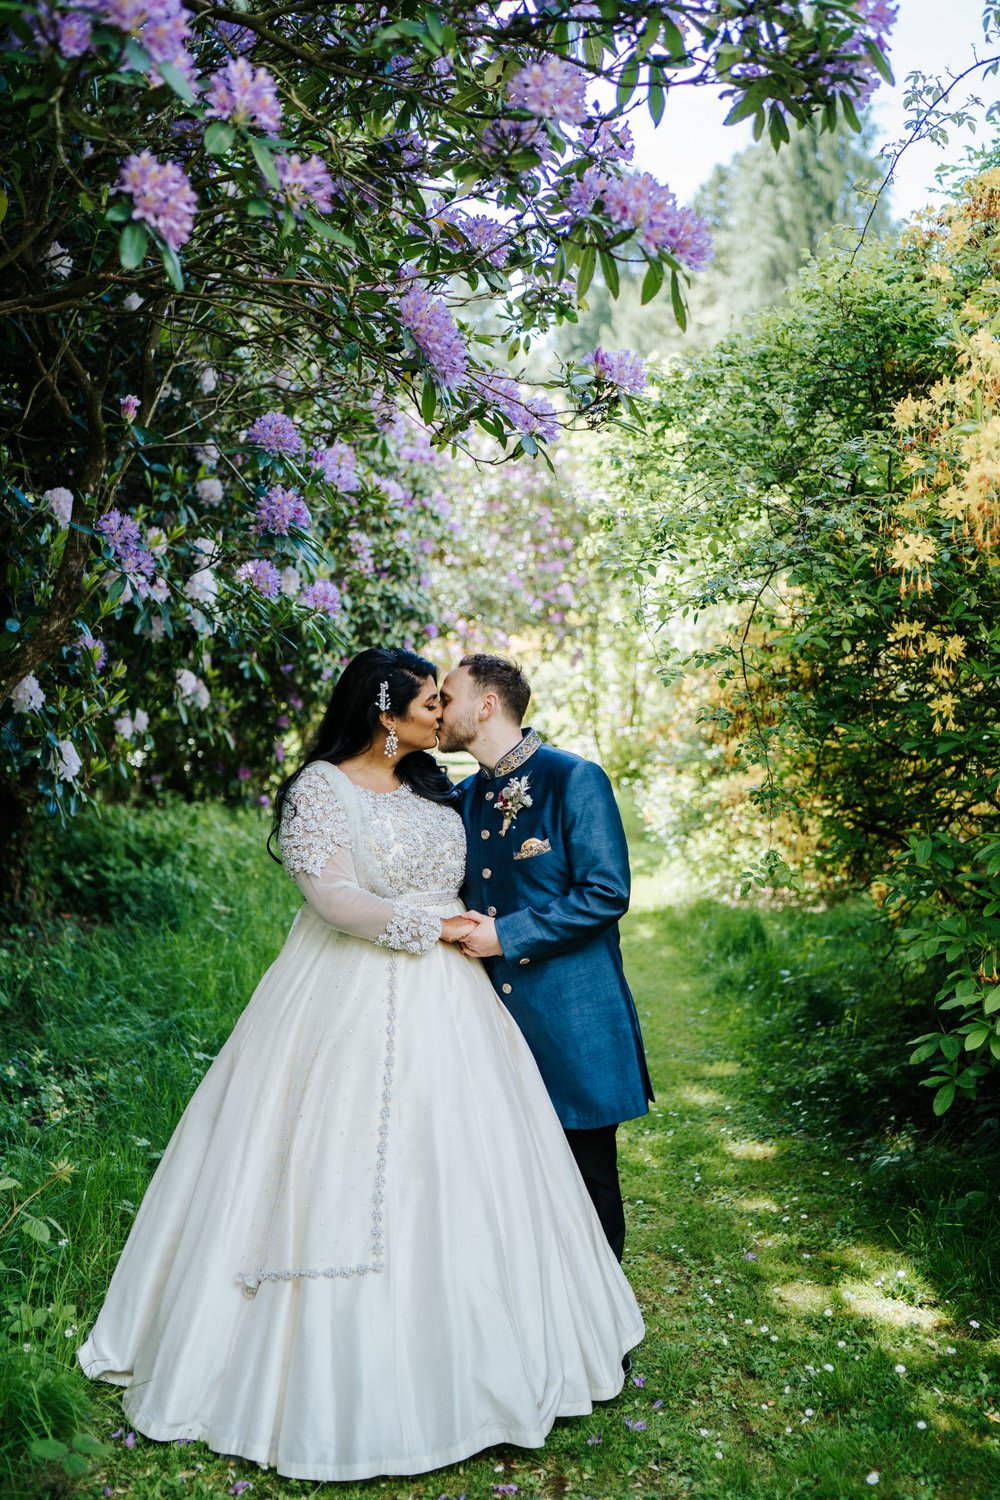 Bride and groom pose under beautiful, violet flowers at Walcot Hall wedding